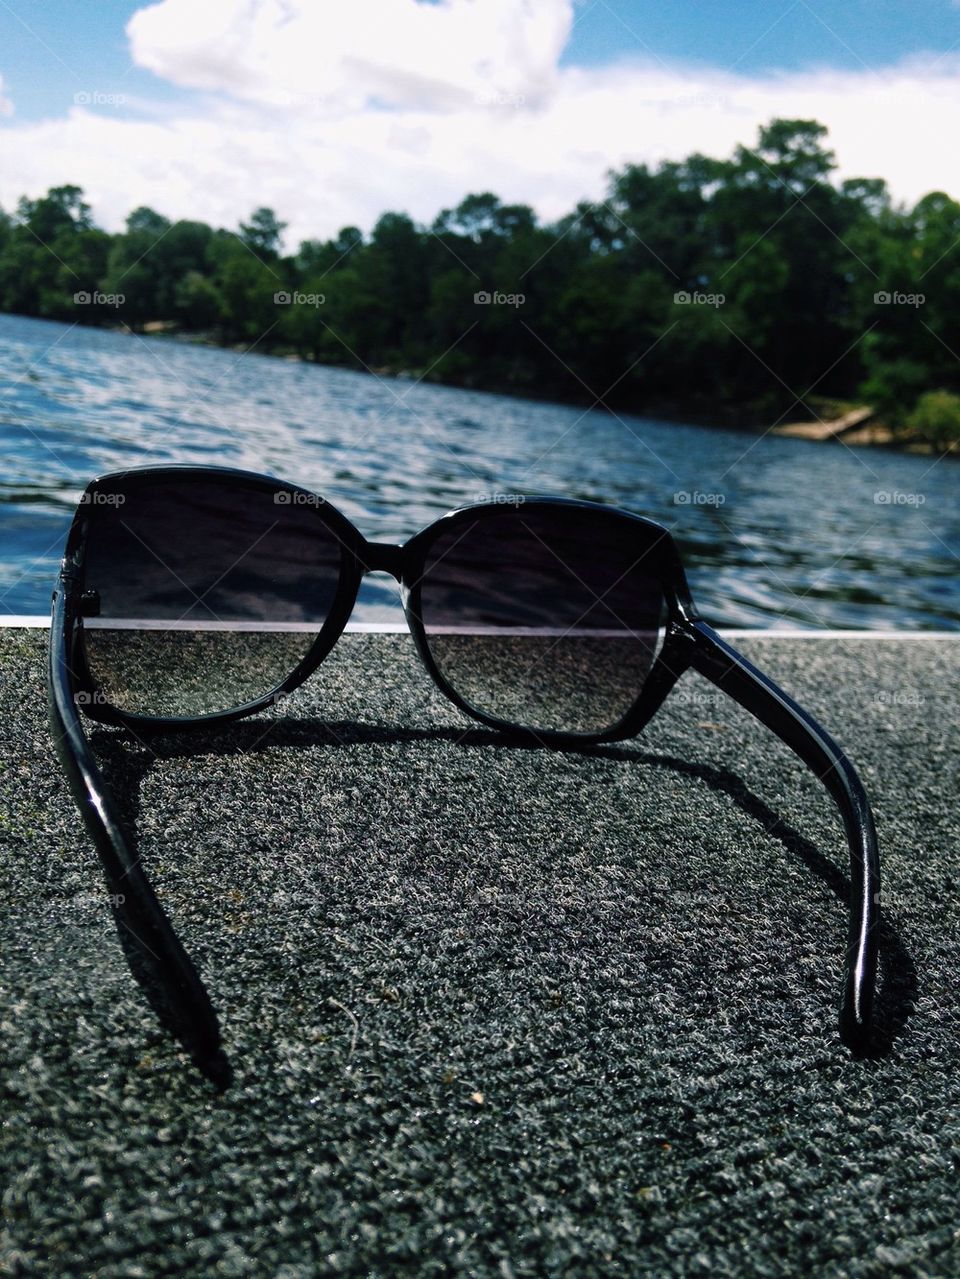 Sunnies on the River